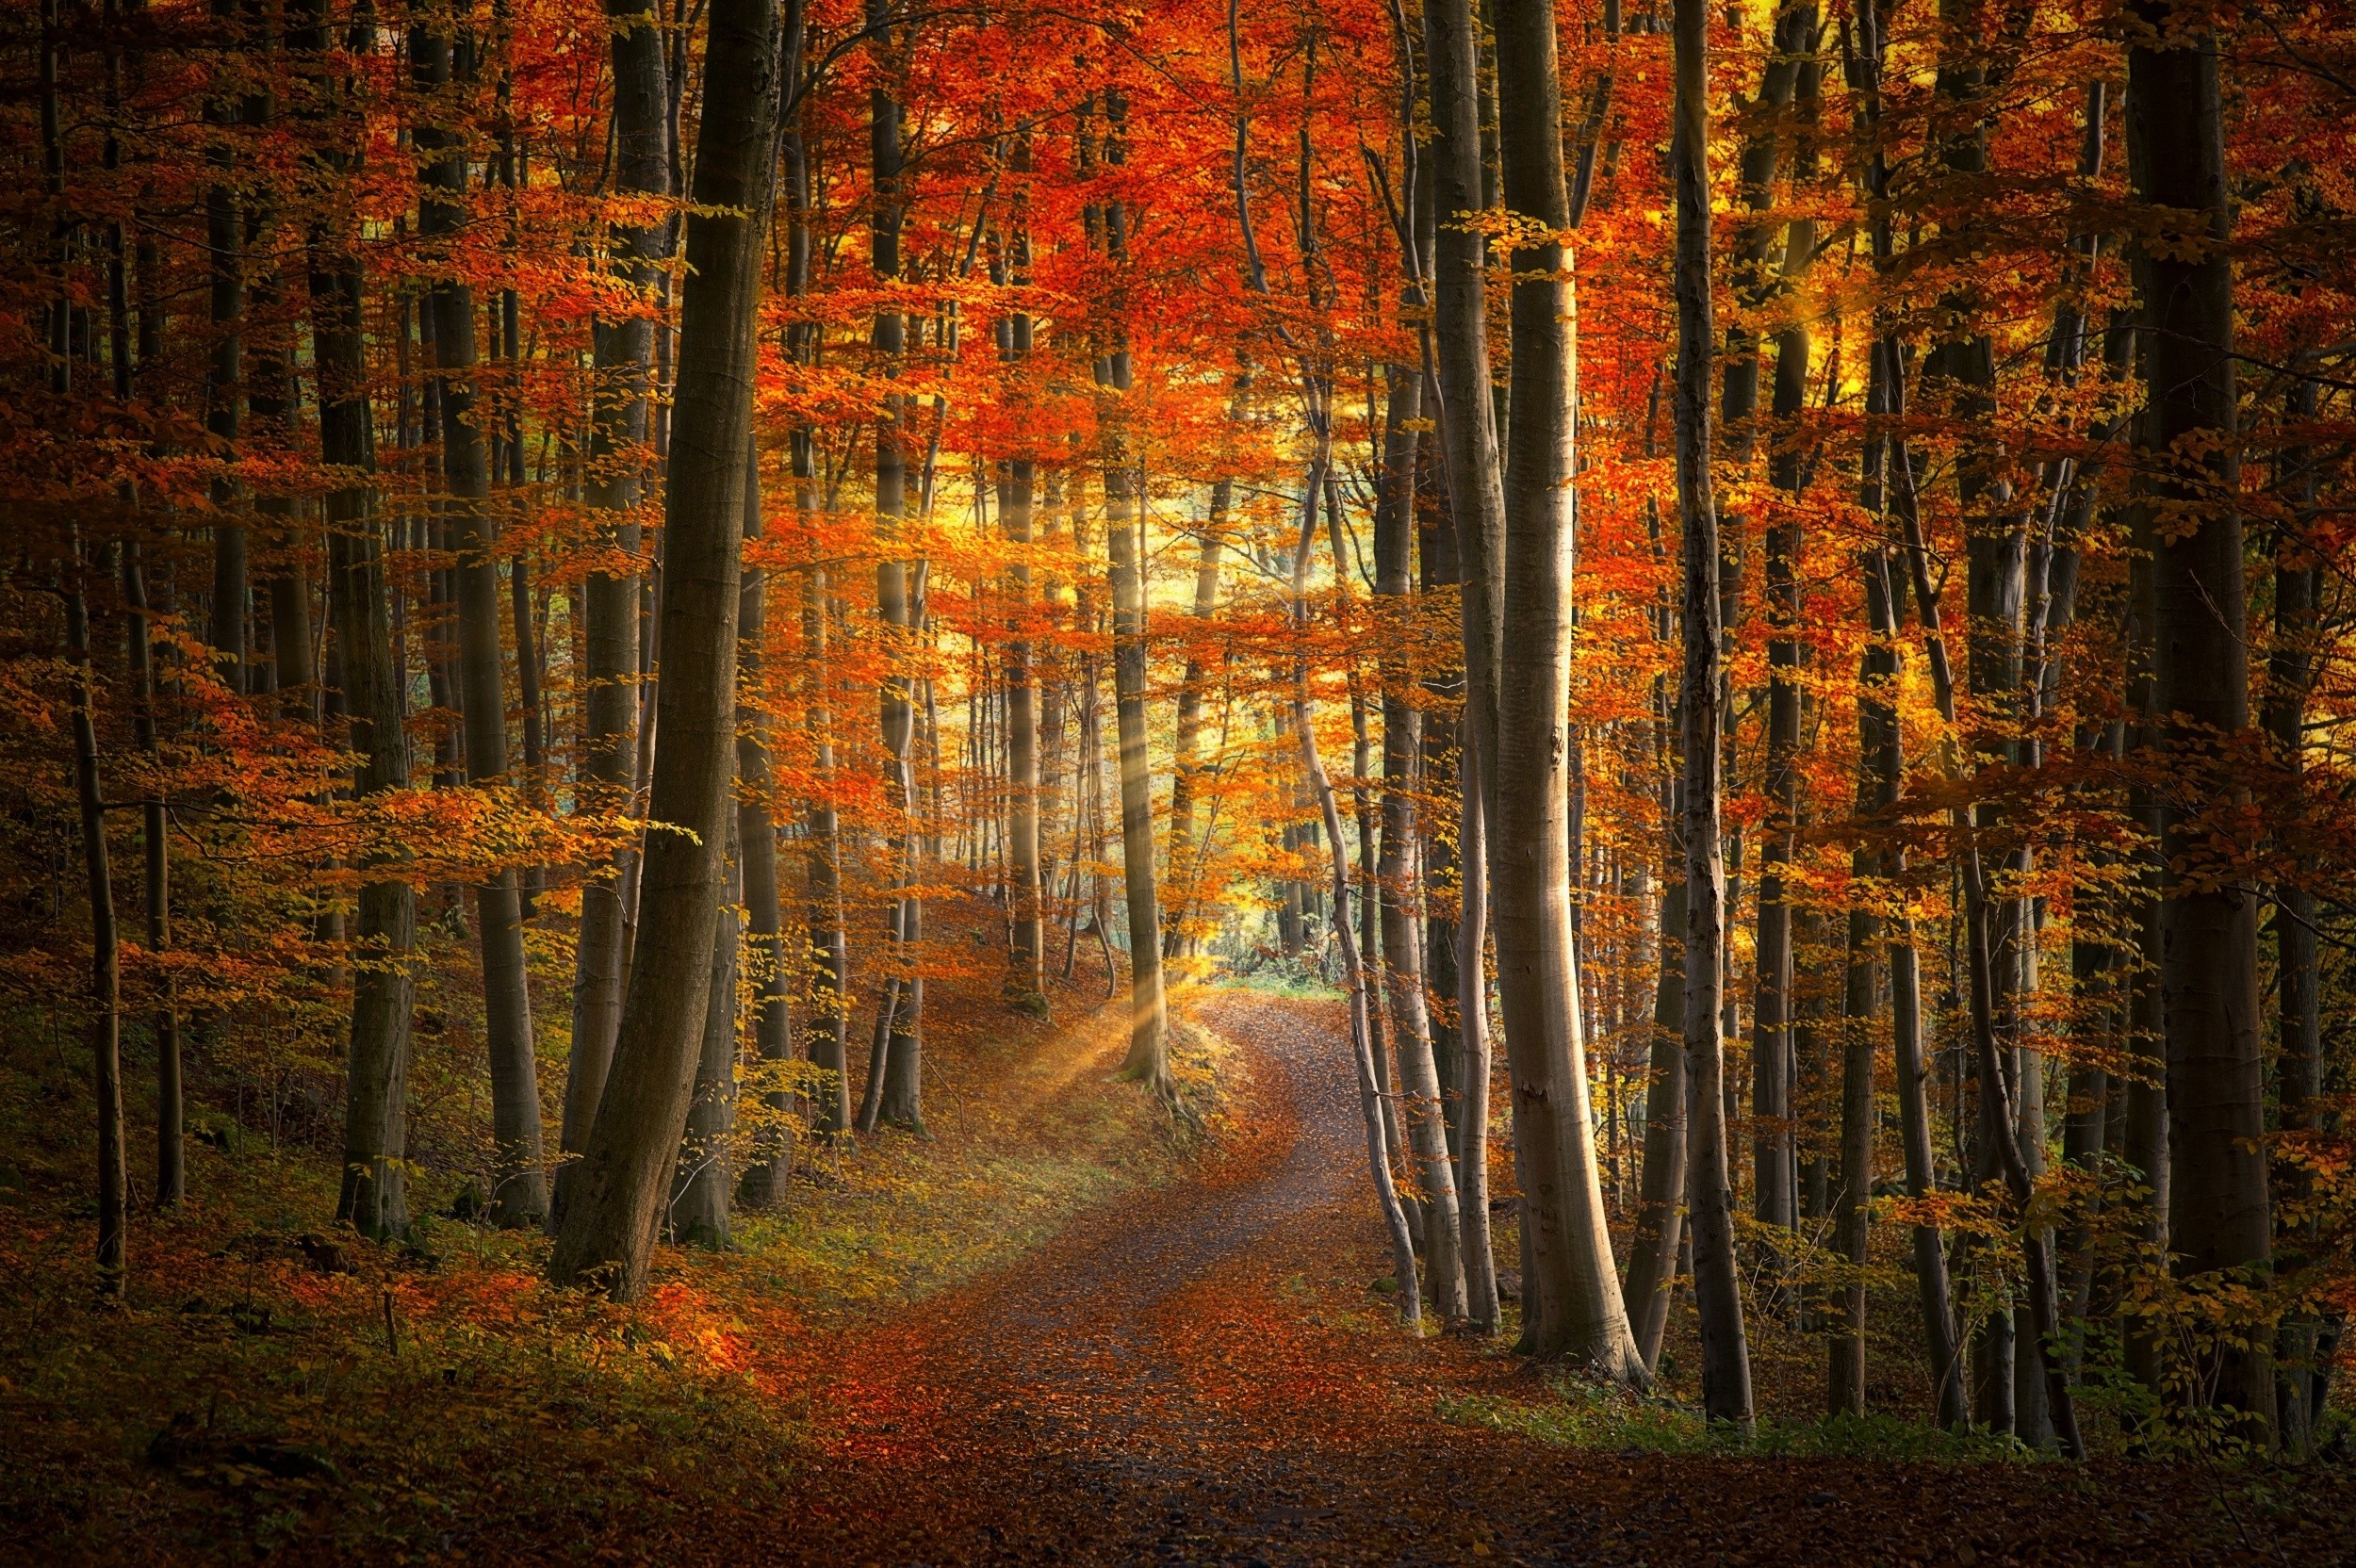 General 2500x1664 path sun rays forest fall leaves grass trees red yellow orange morning road nature landscape